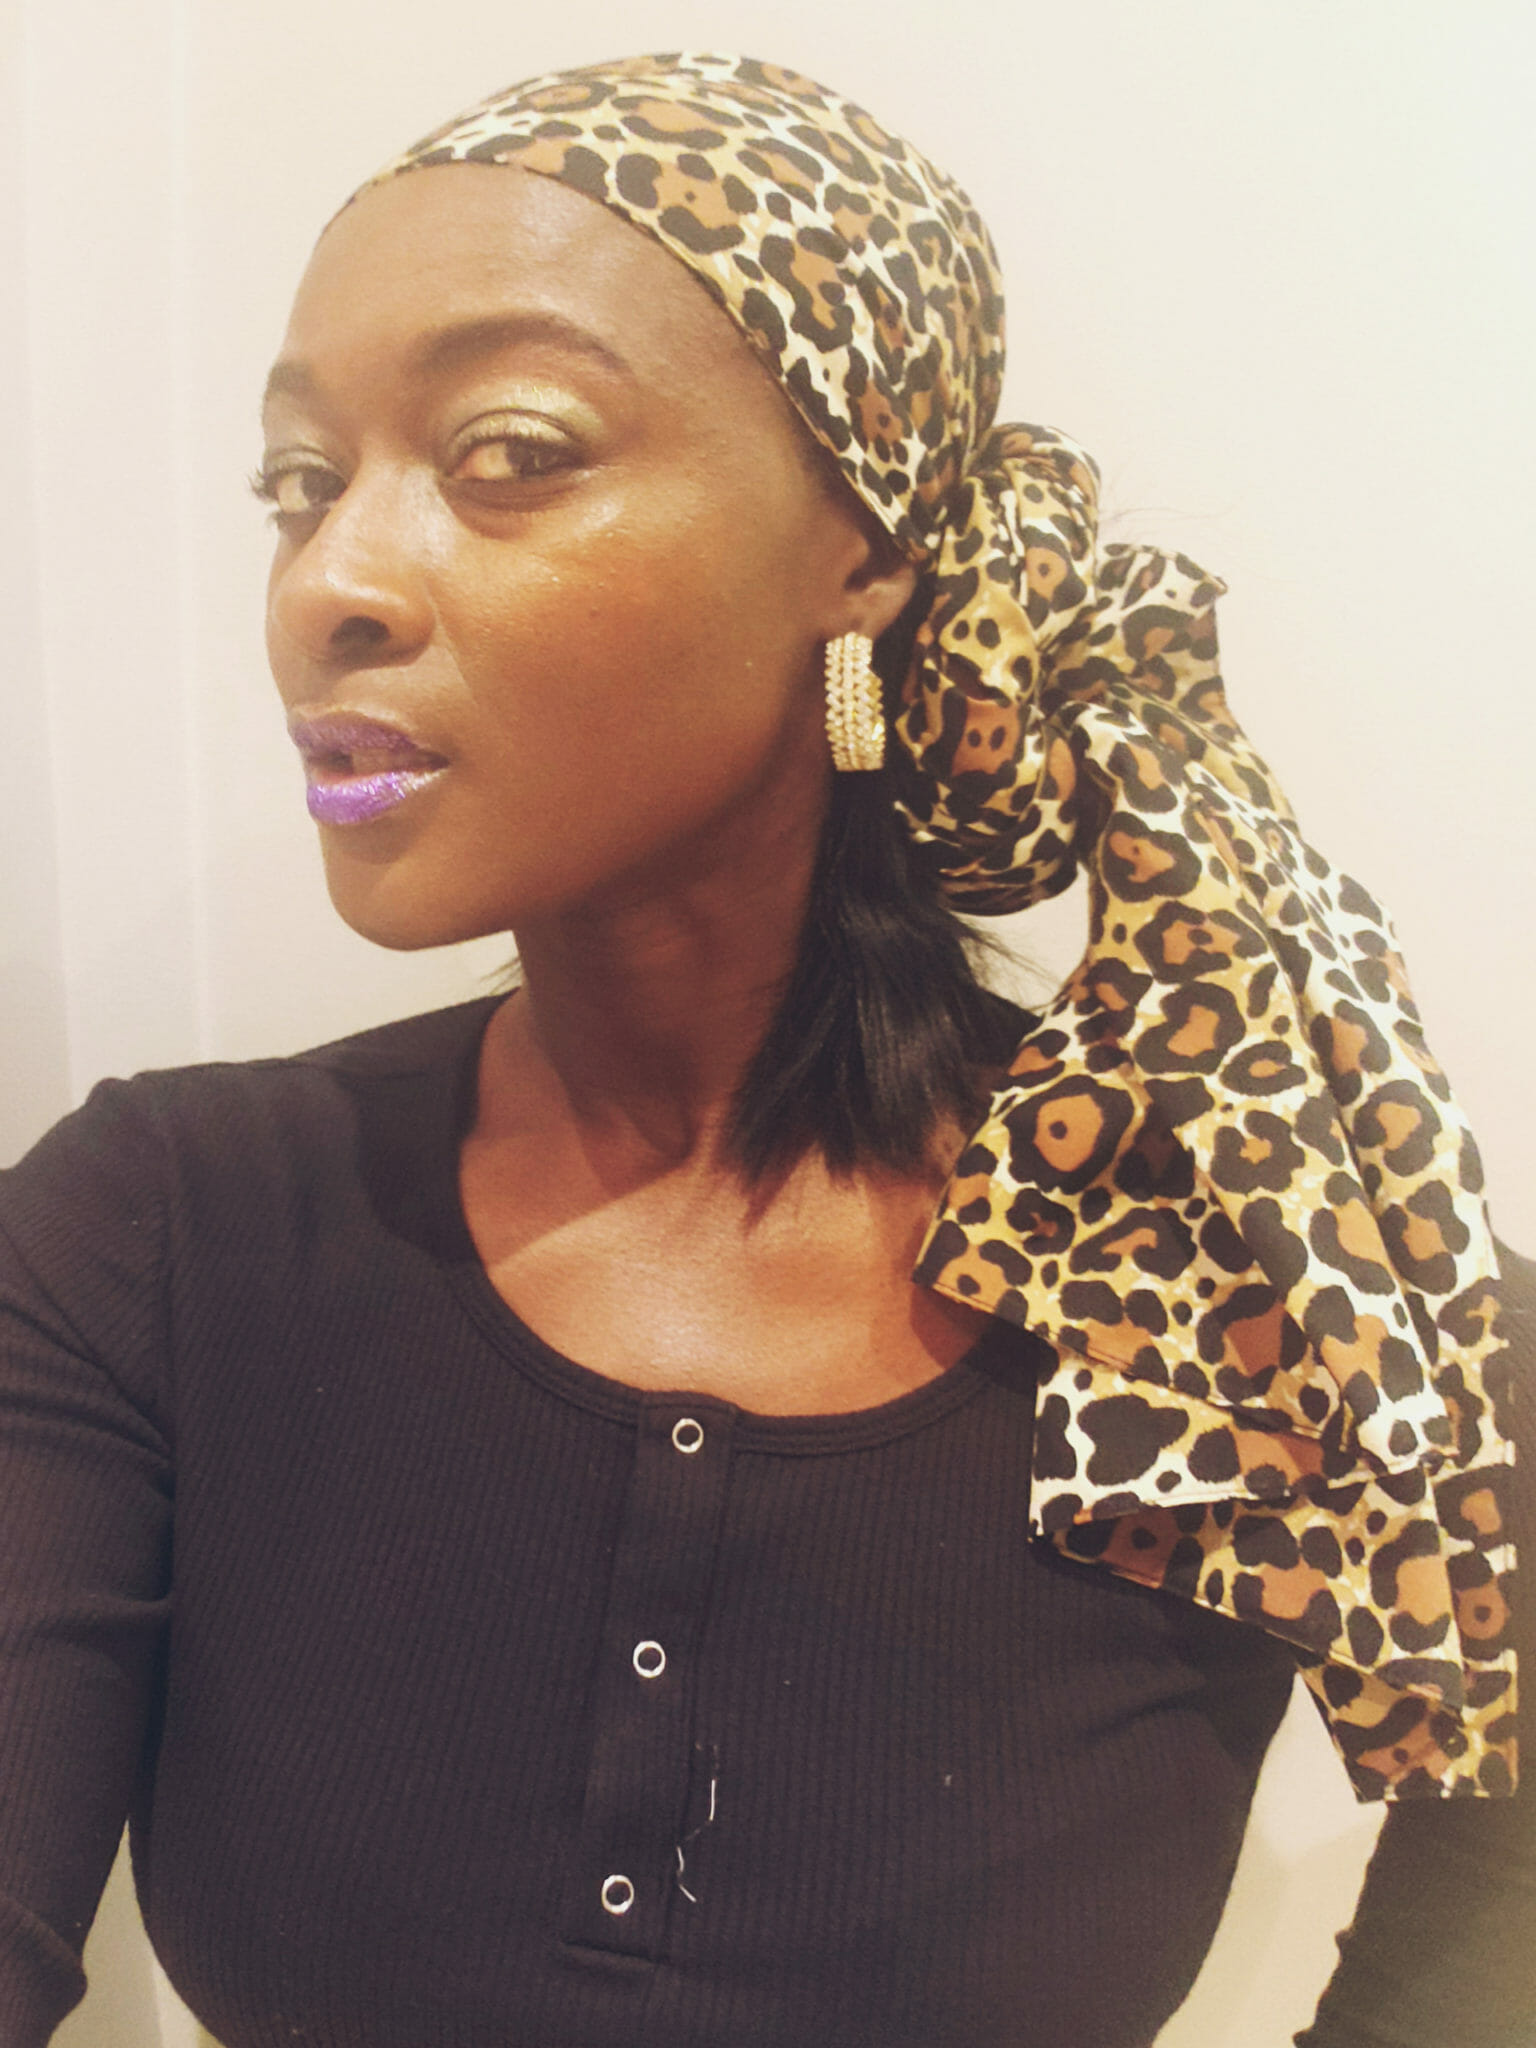 An African-American woman wearing a black dress and a cheetah print headwrap with ends on her shoulder.